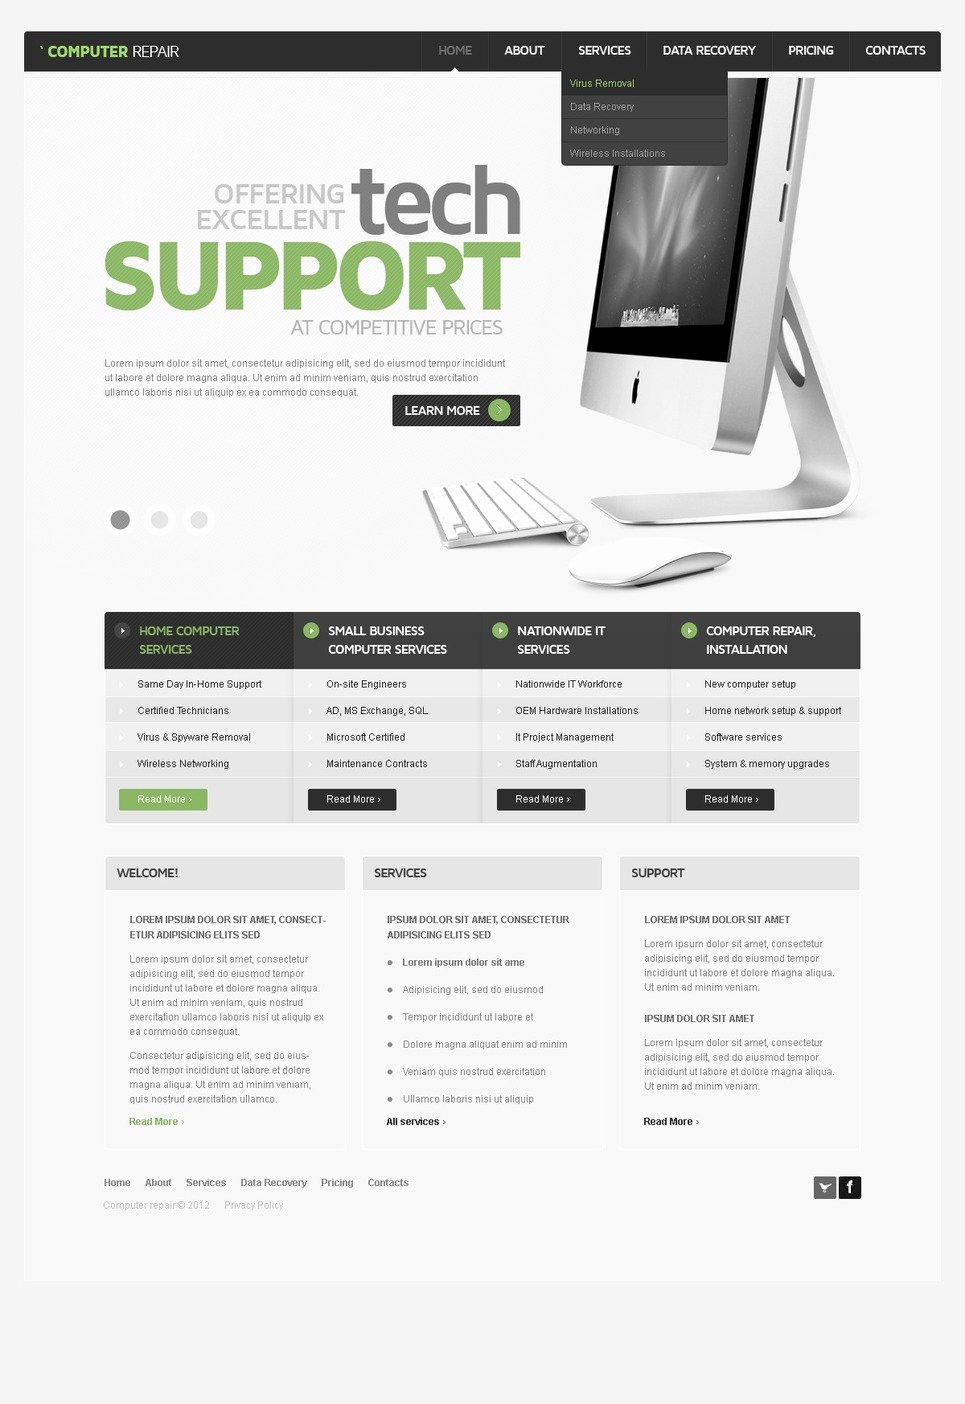 Free Computer Repair Website Template Awesome Puter Repair Website Template